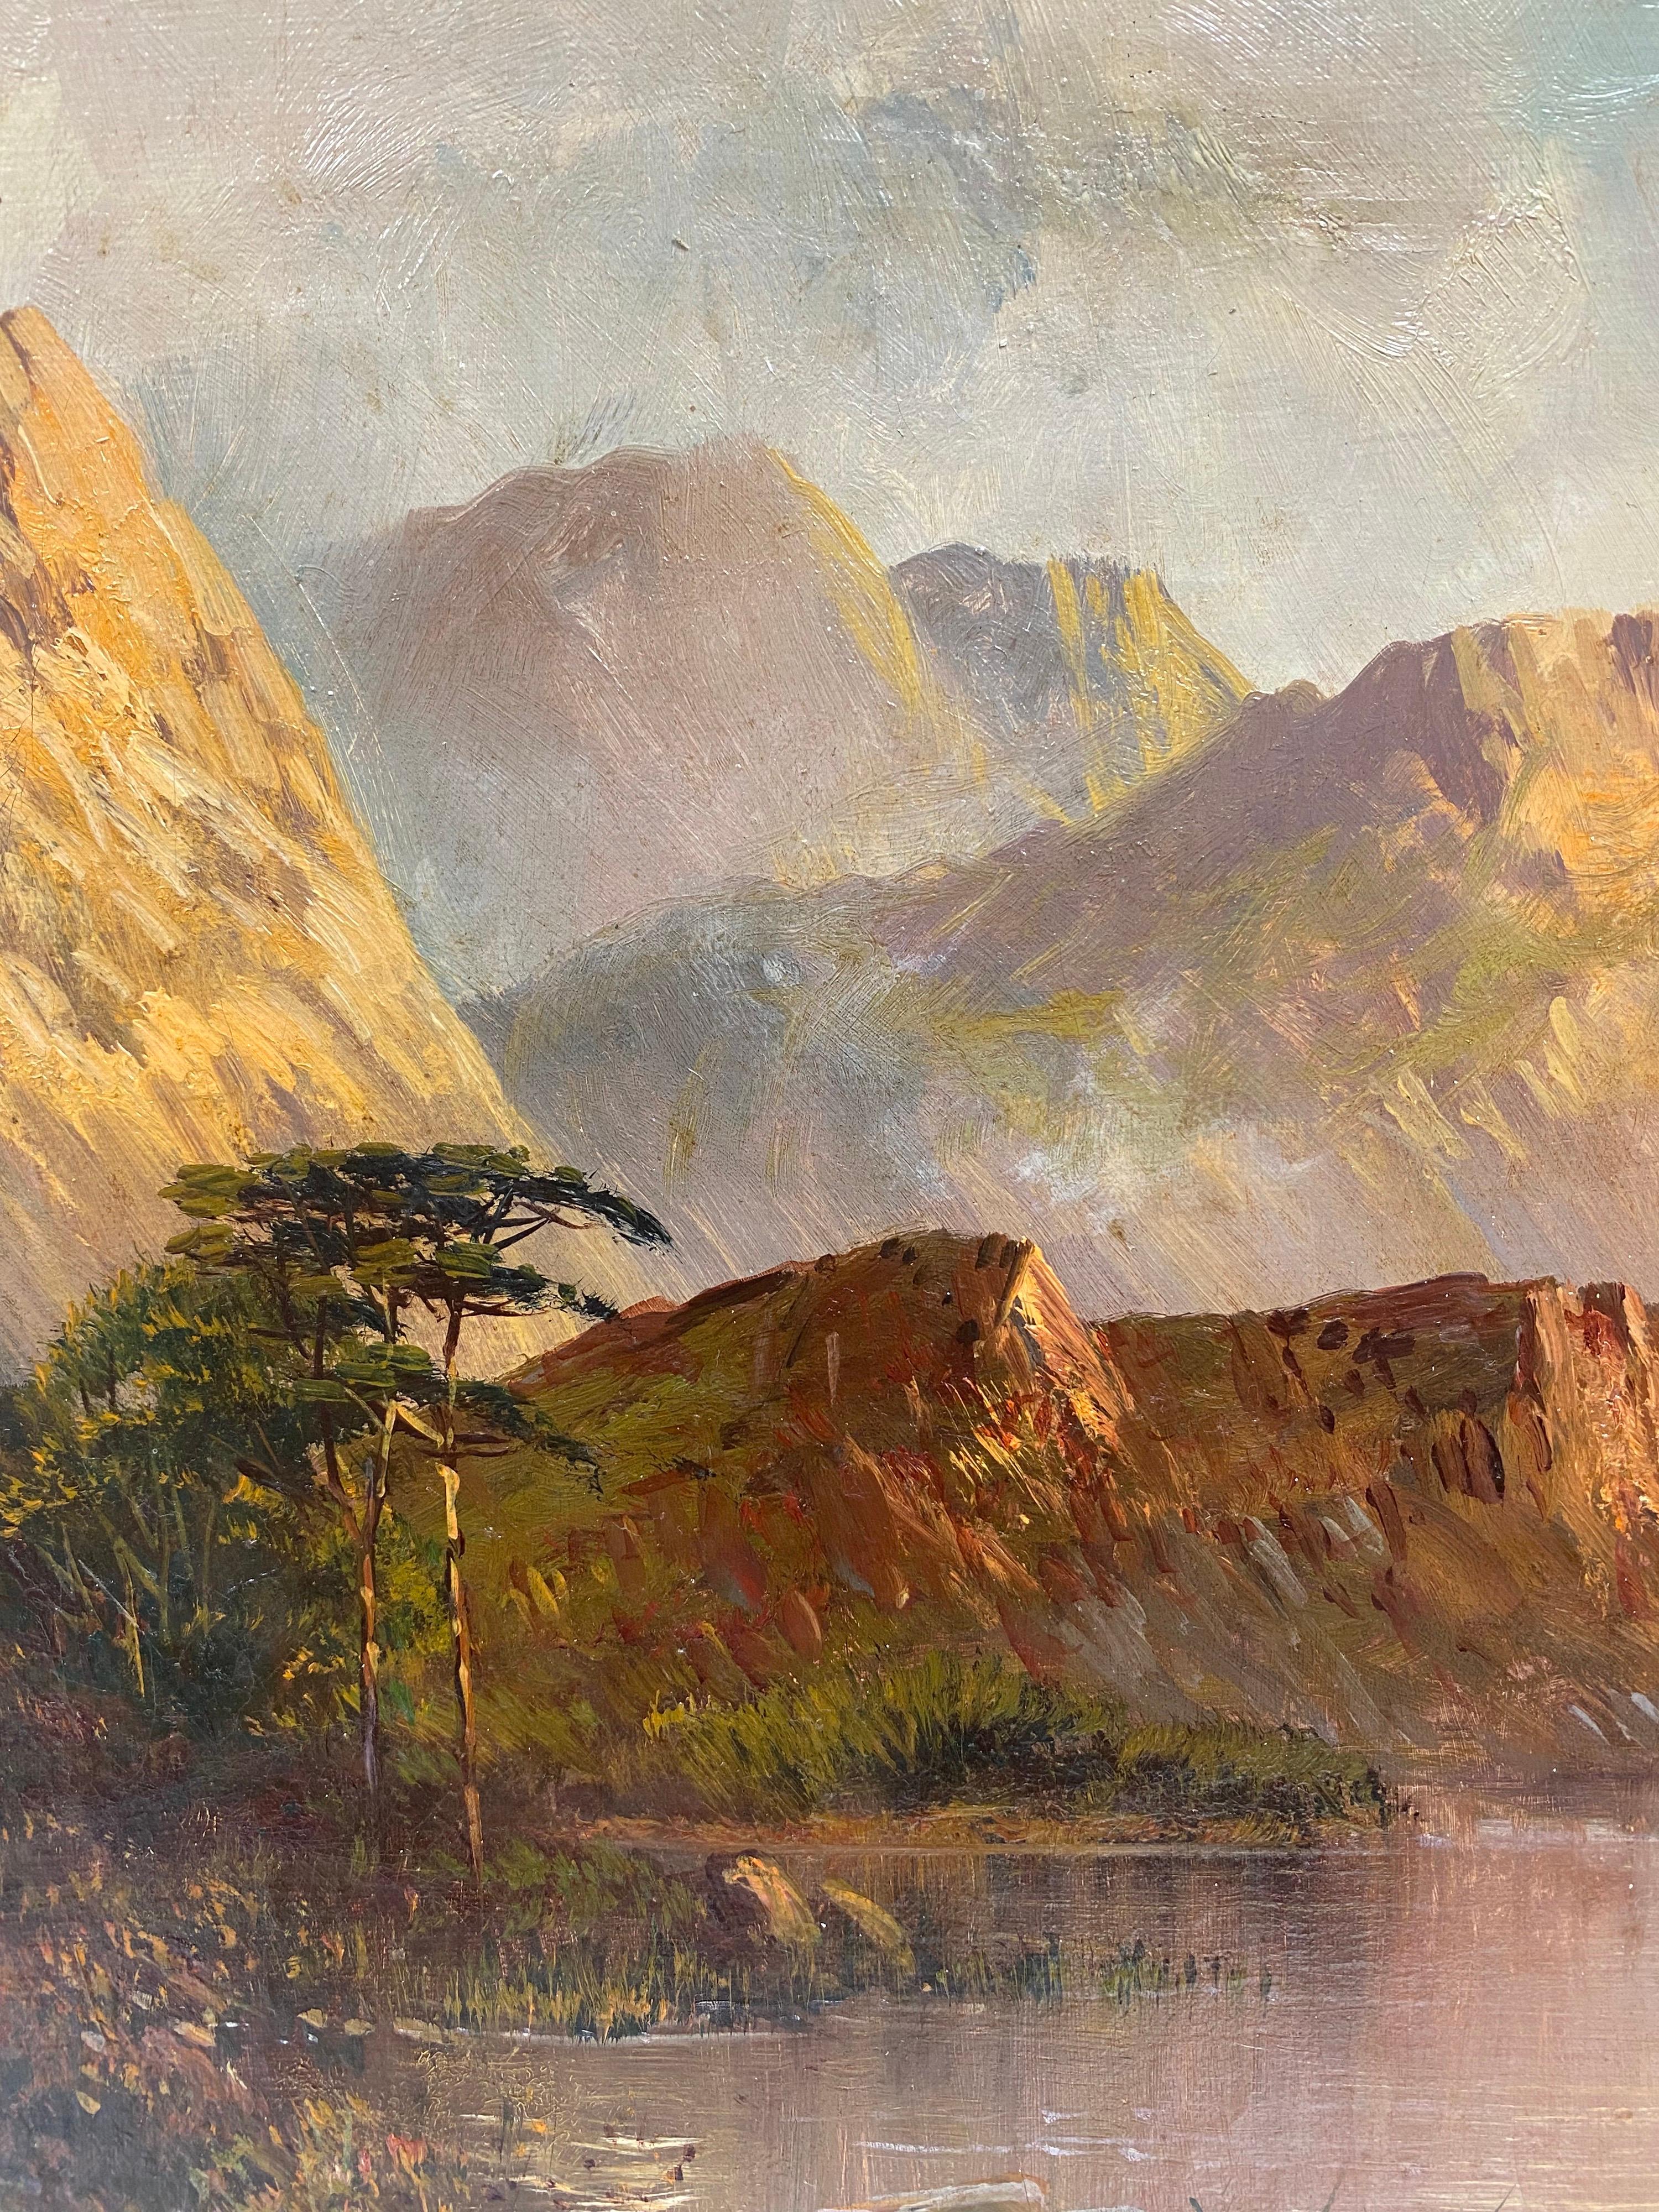 Sunset in the Highlands
by F. E. Jamieson (British 1895-1950)
signed lower corner with the artists pseudonym 'Phil Hips'. 
oil painting on canvas, unframed
canvas: 16 x 24 inches


Fine quality antique oil painting by the much admired and celebrated